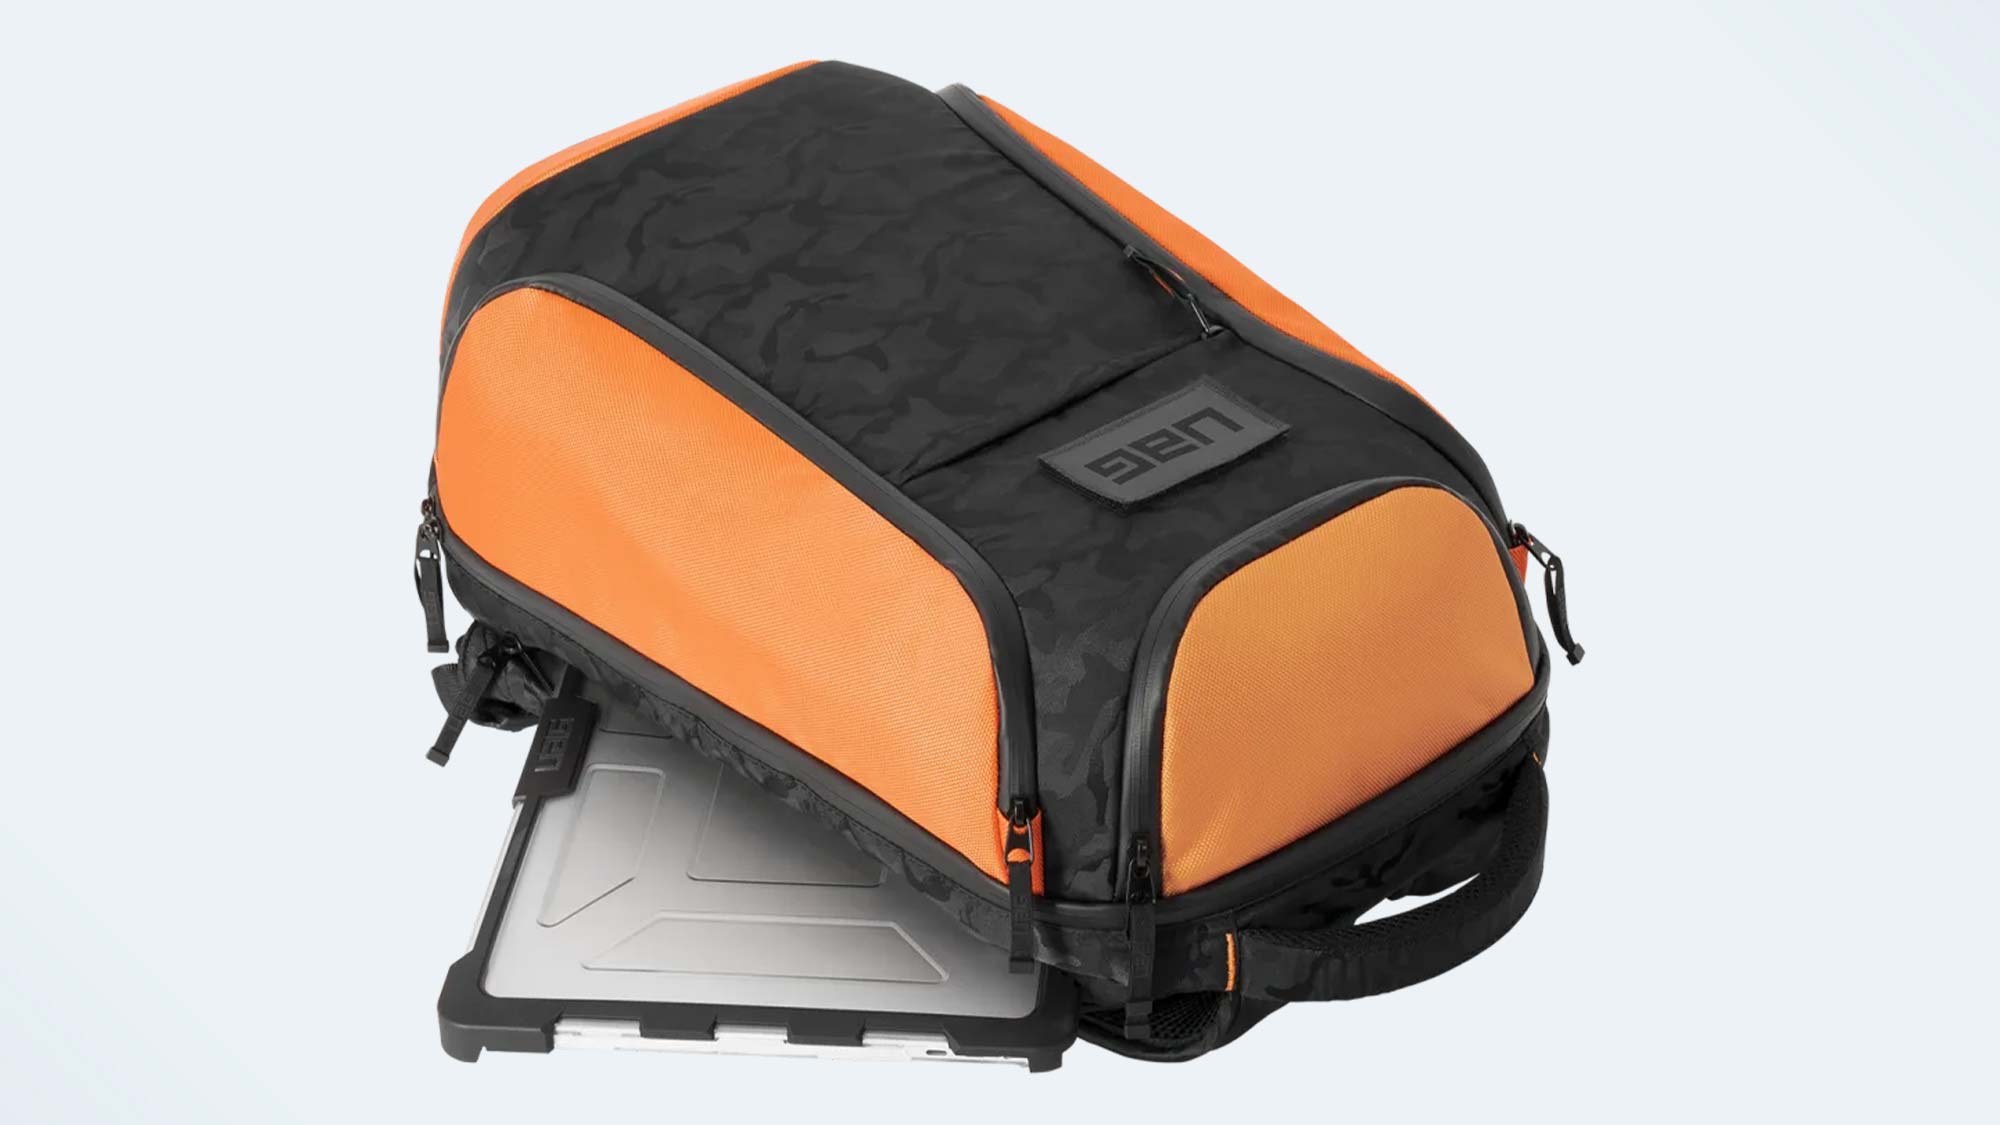 The best laptop backpacks in 2022